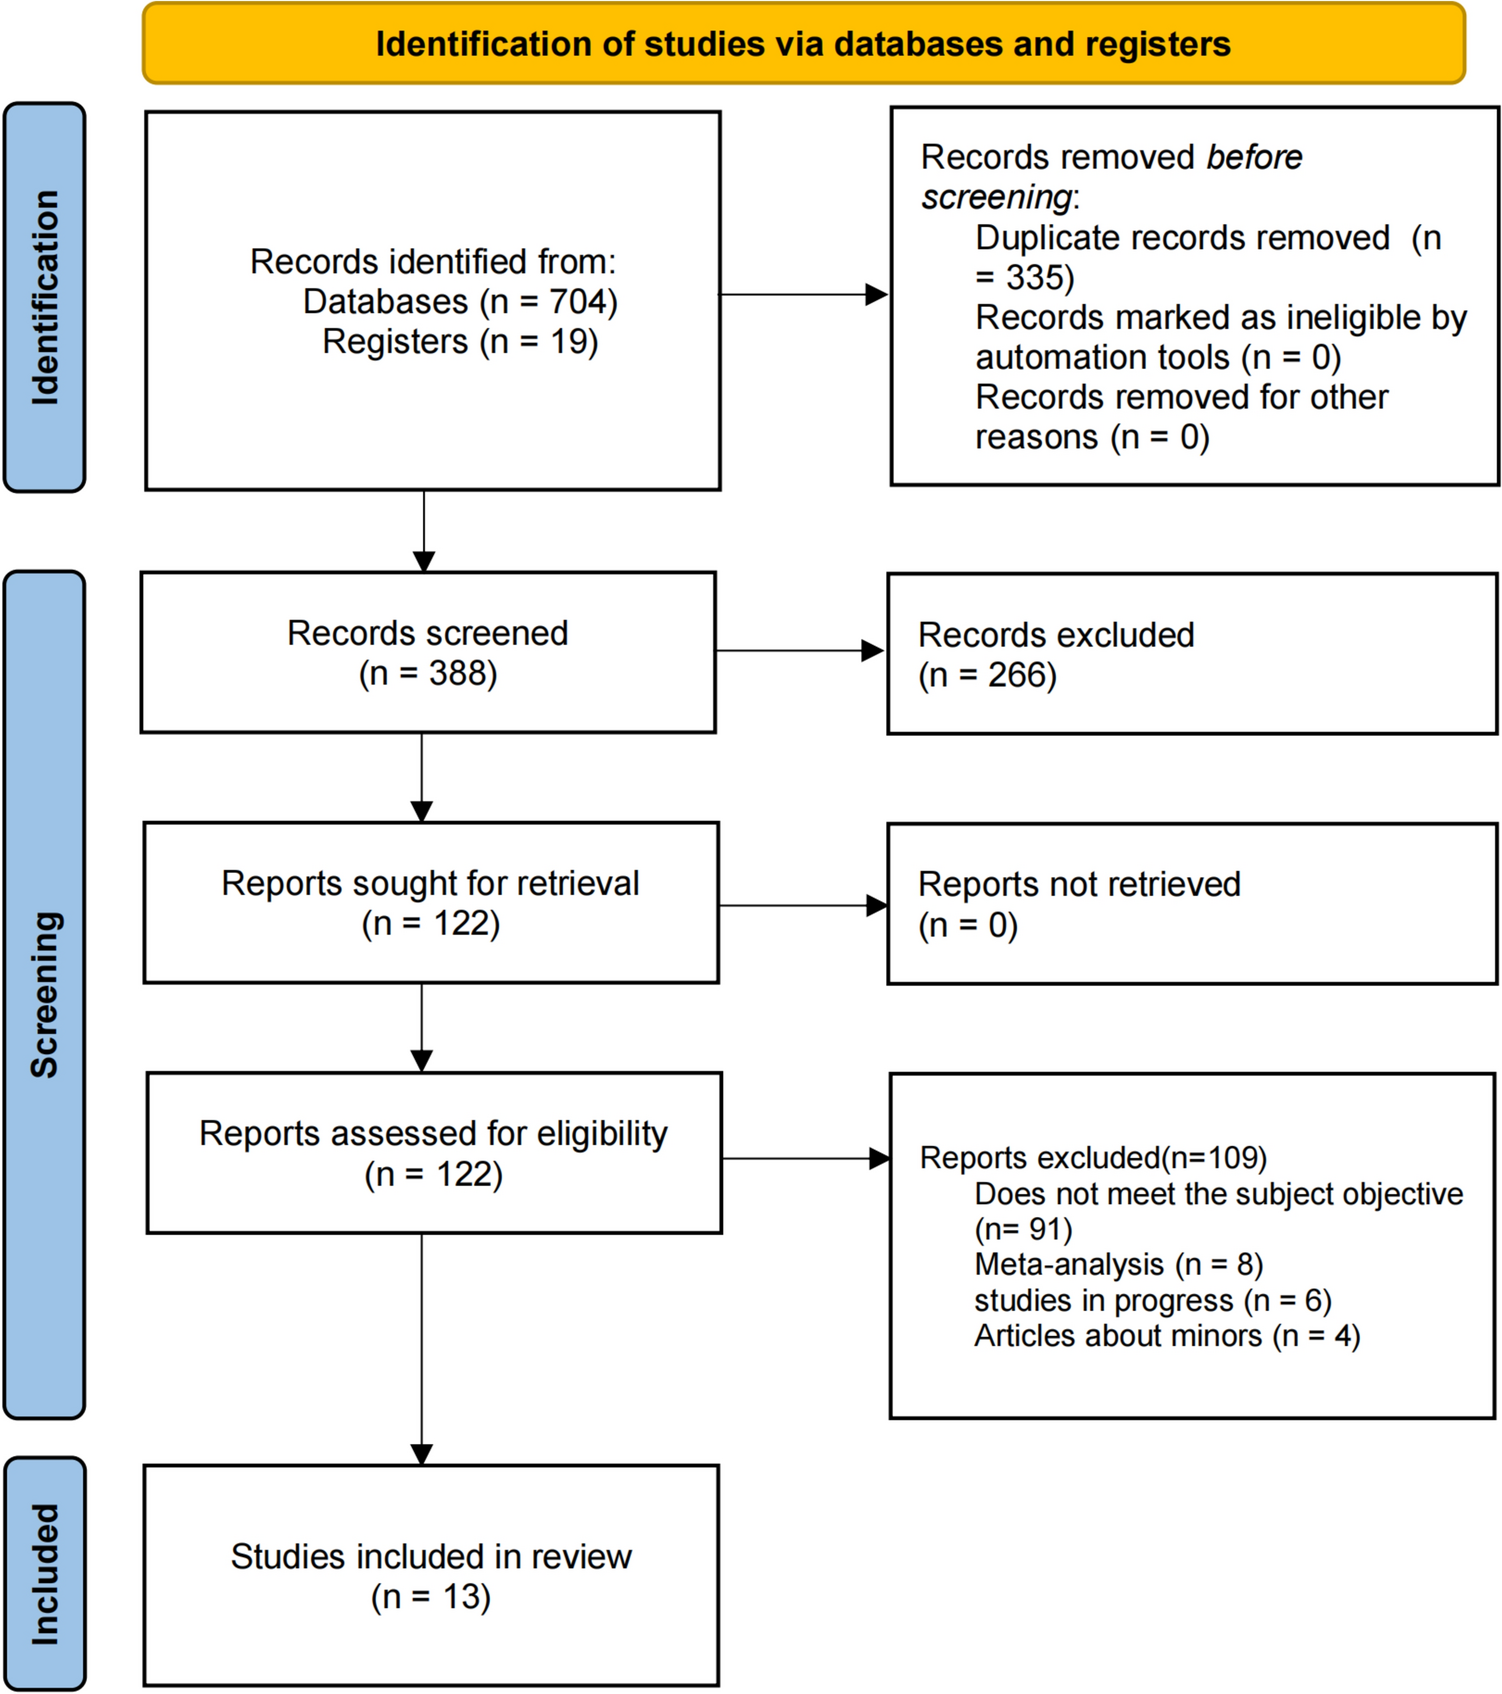 The Efficacy and Safety of Different Targeted Drugs for the Treatment of Generalized Myasthenia Gravis: A Systematic Review and Bayesian Network Meta-analysis